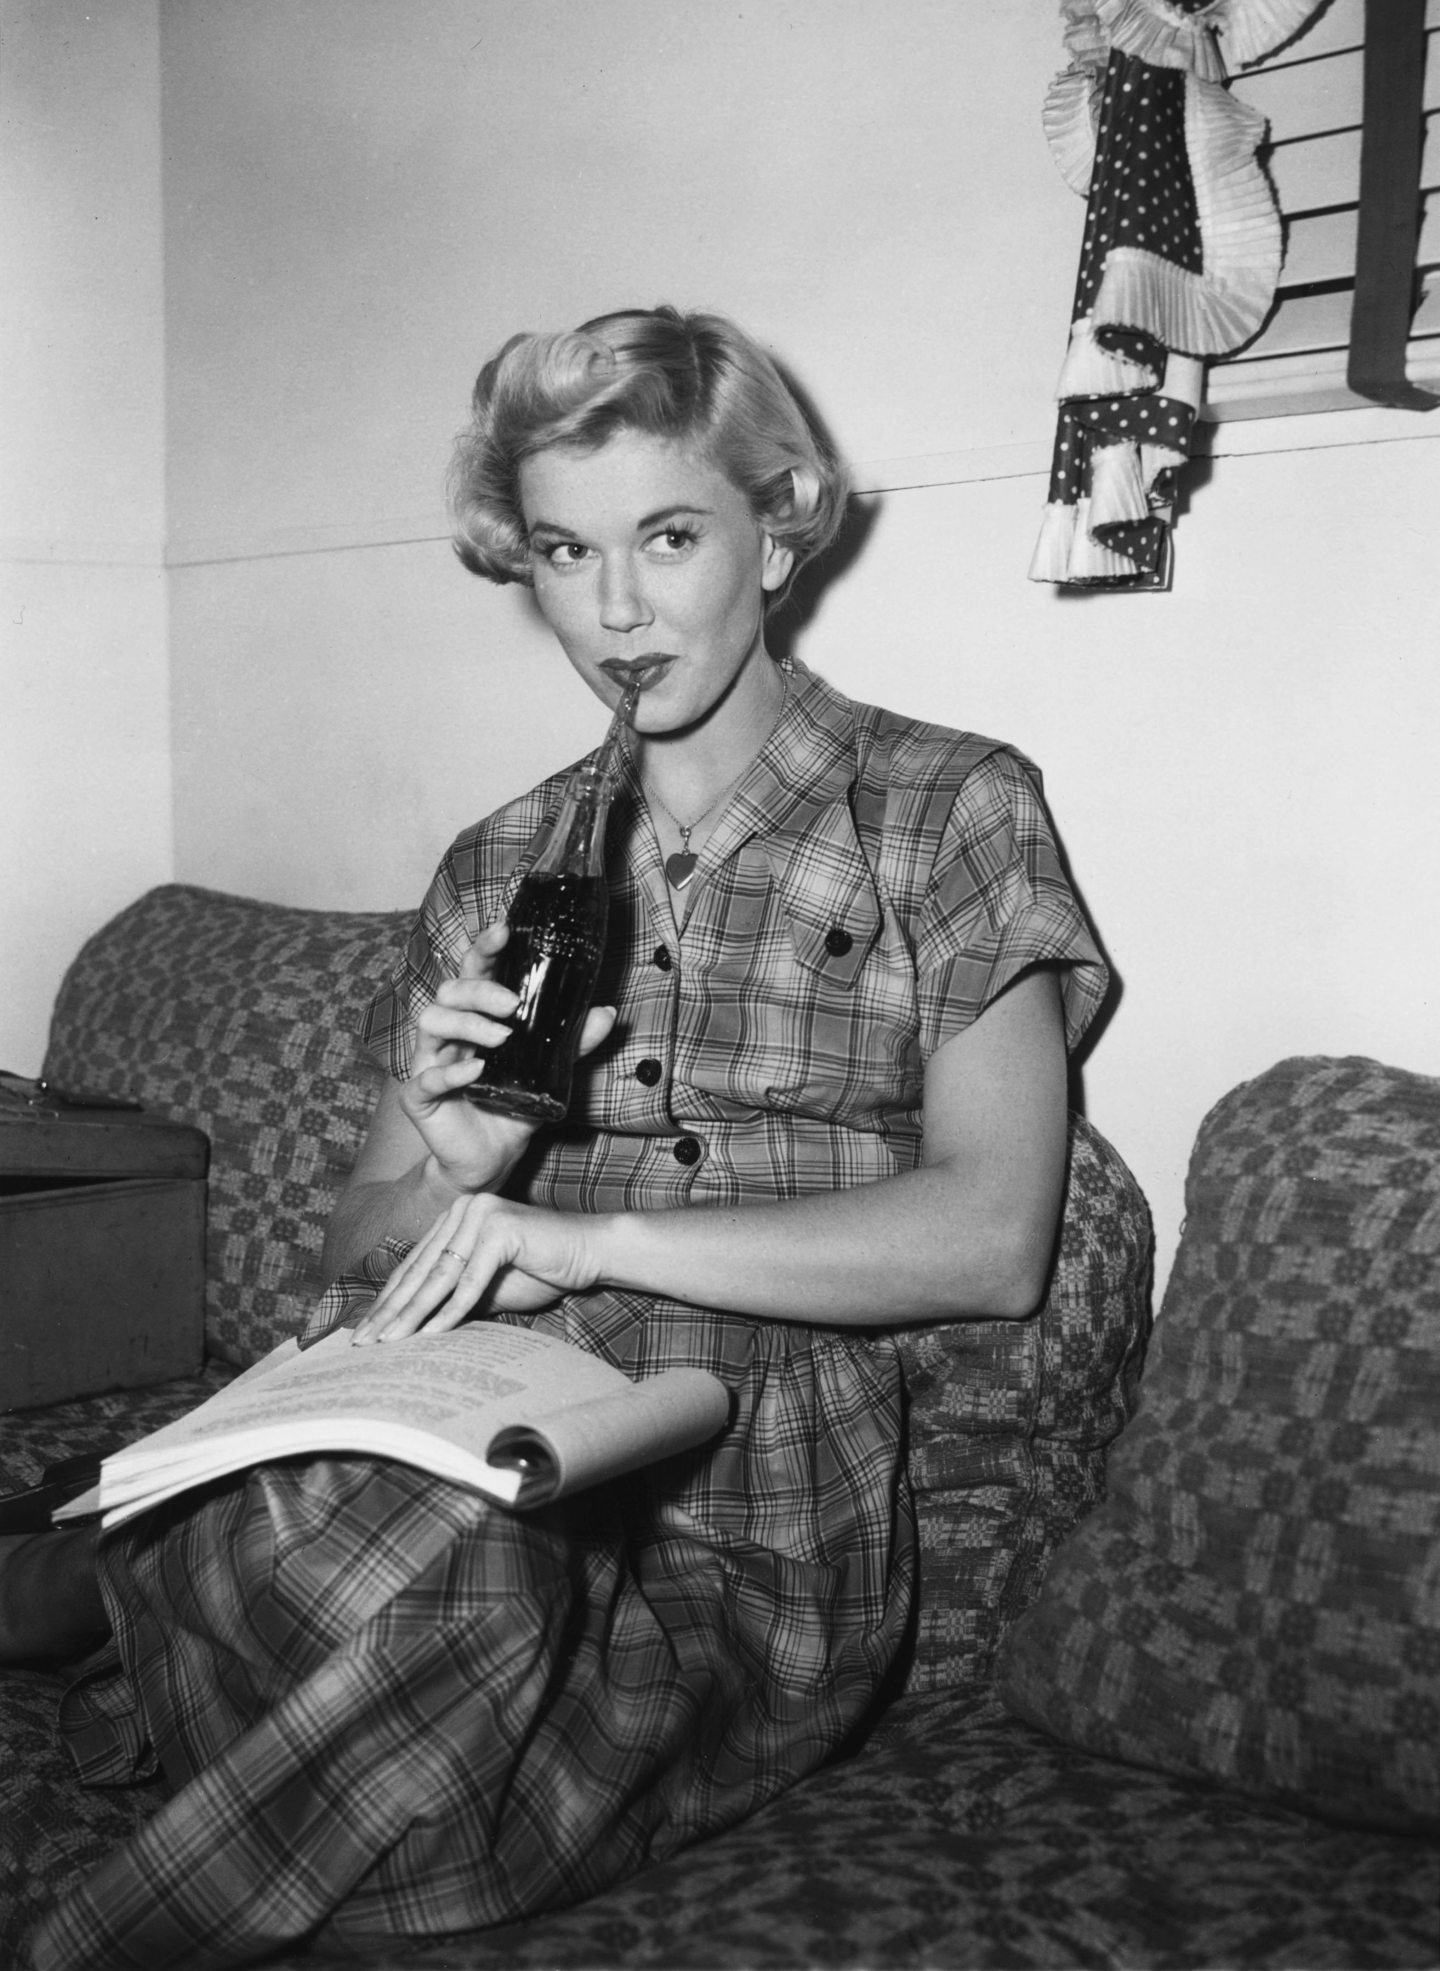 Actress Doris Day pictured drinking Coca-Cola on the set of By The Light Of The Silvery Moon in 1953. Image: Warner Bros/Kobal/Shutterstock.